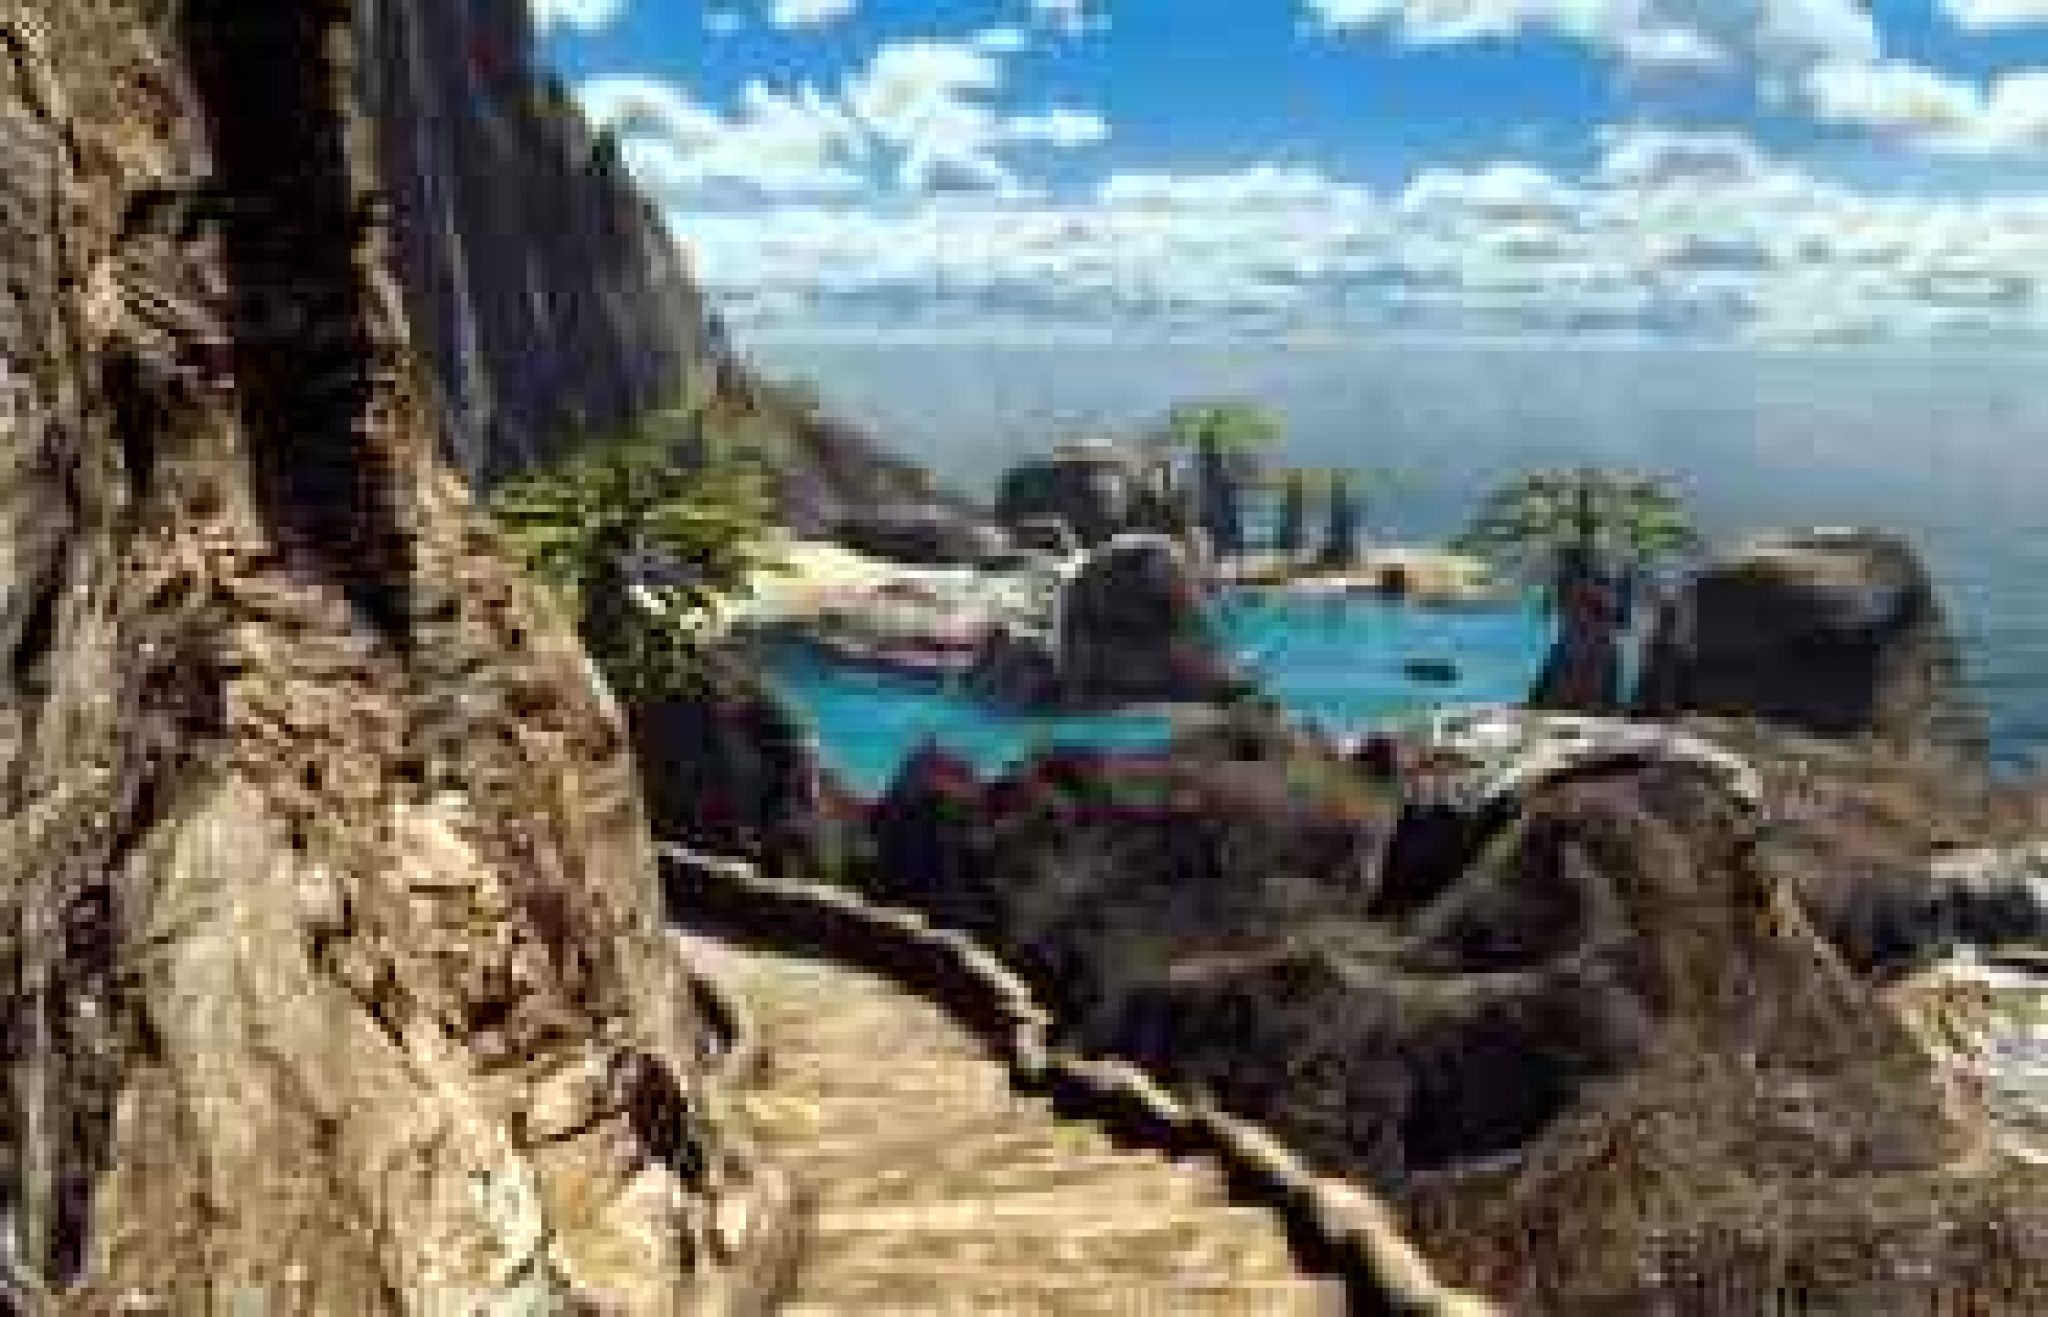 riven-the-sequel-to-myst-free-download-pc-game-hdpcgames